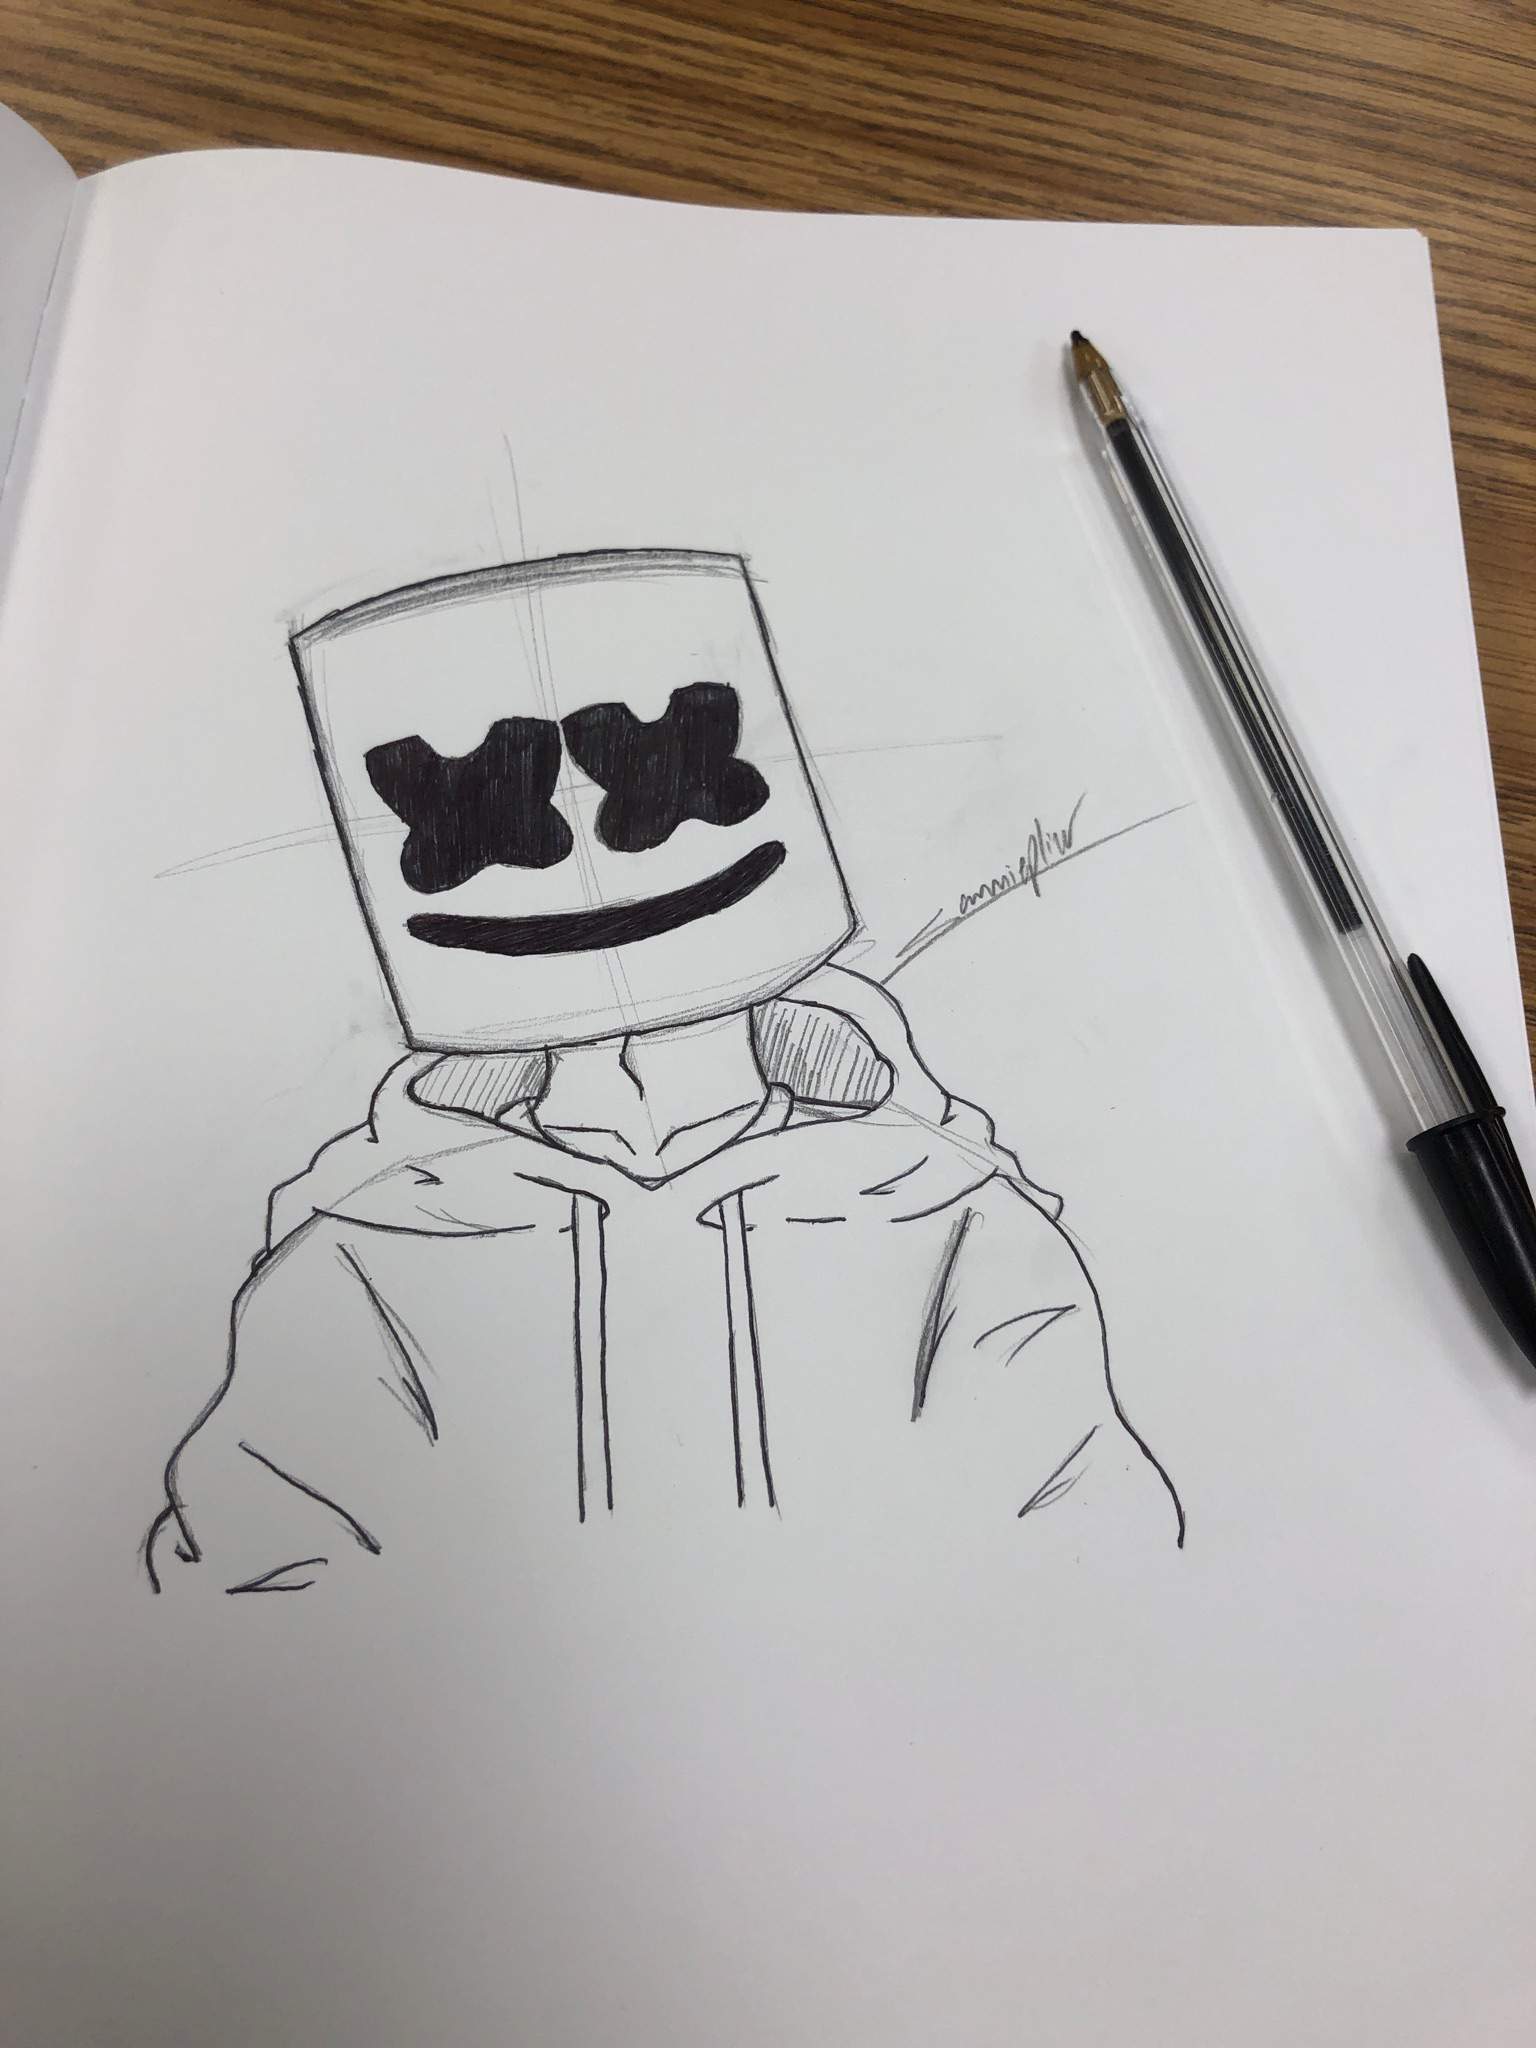 Sketch of marshmello finished with pencil 2H  8B on paper  Traditional  art Dj Marshmellow